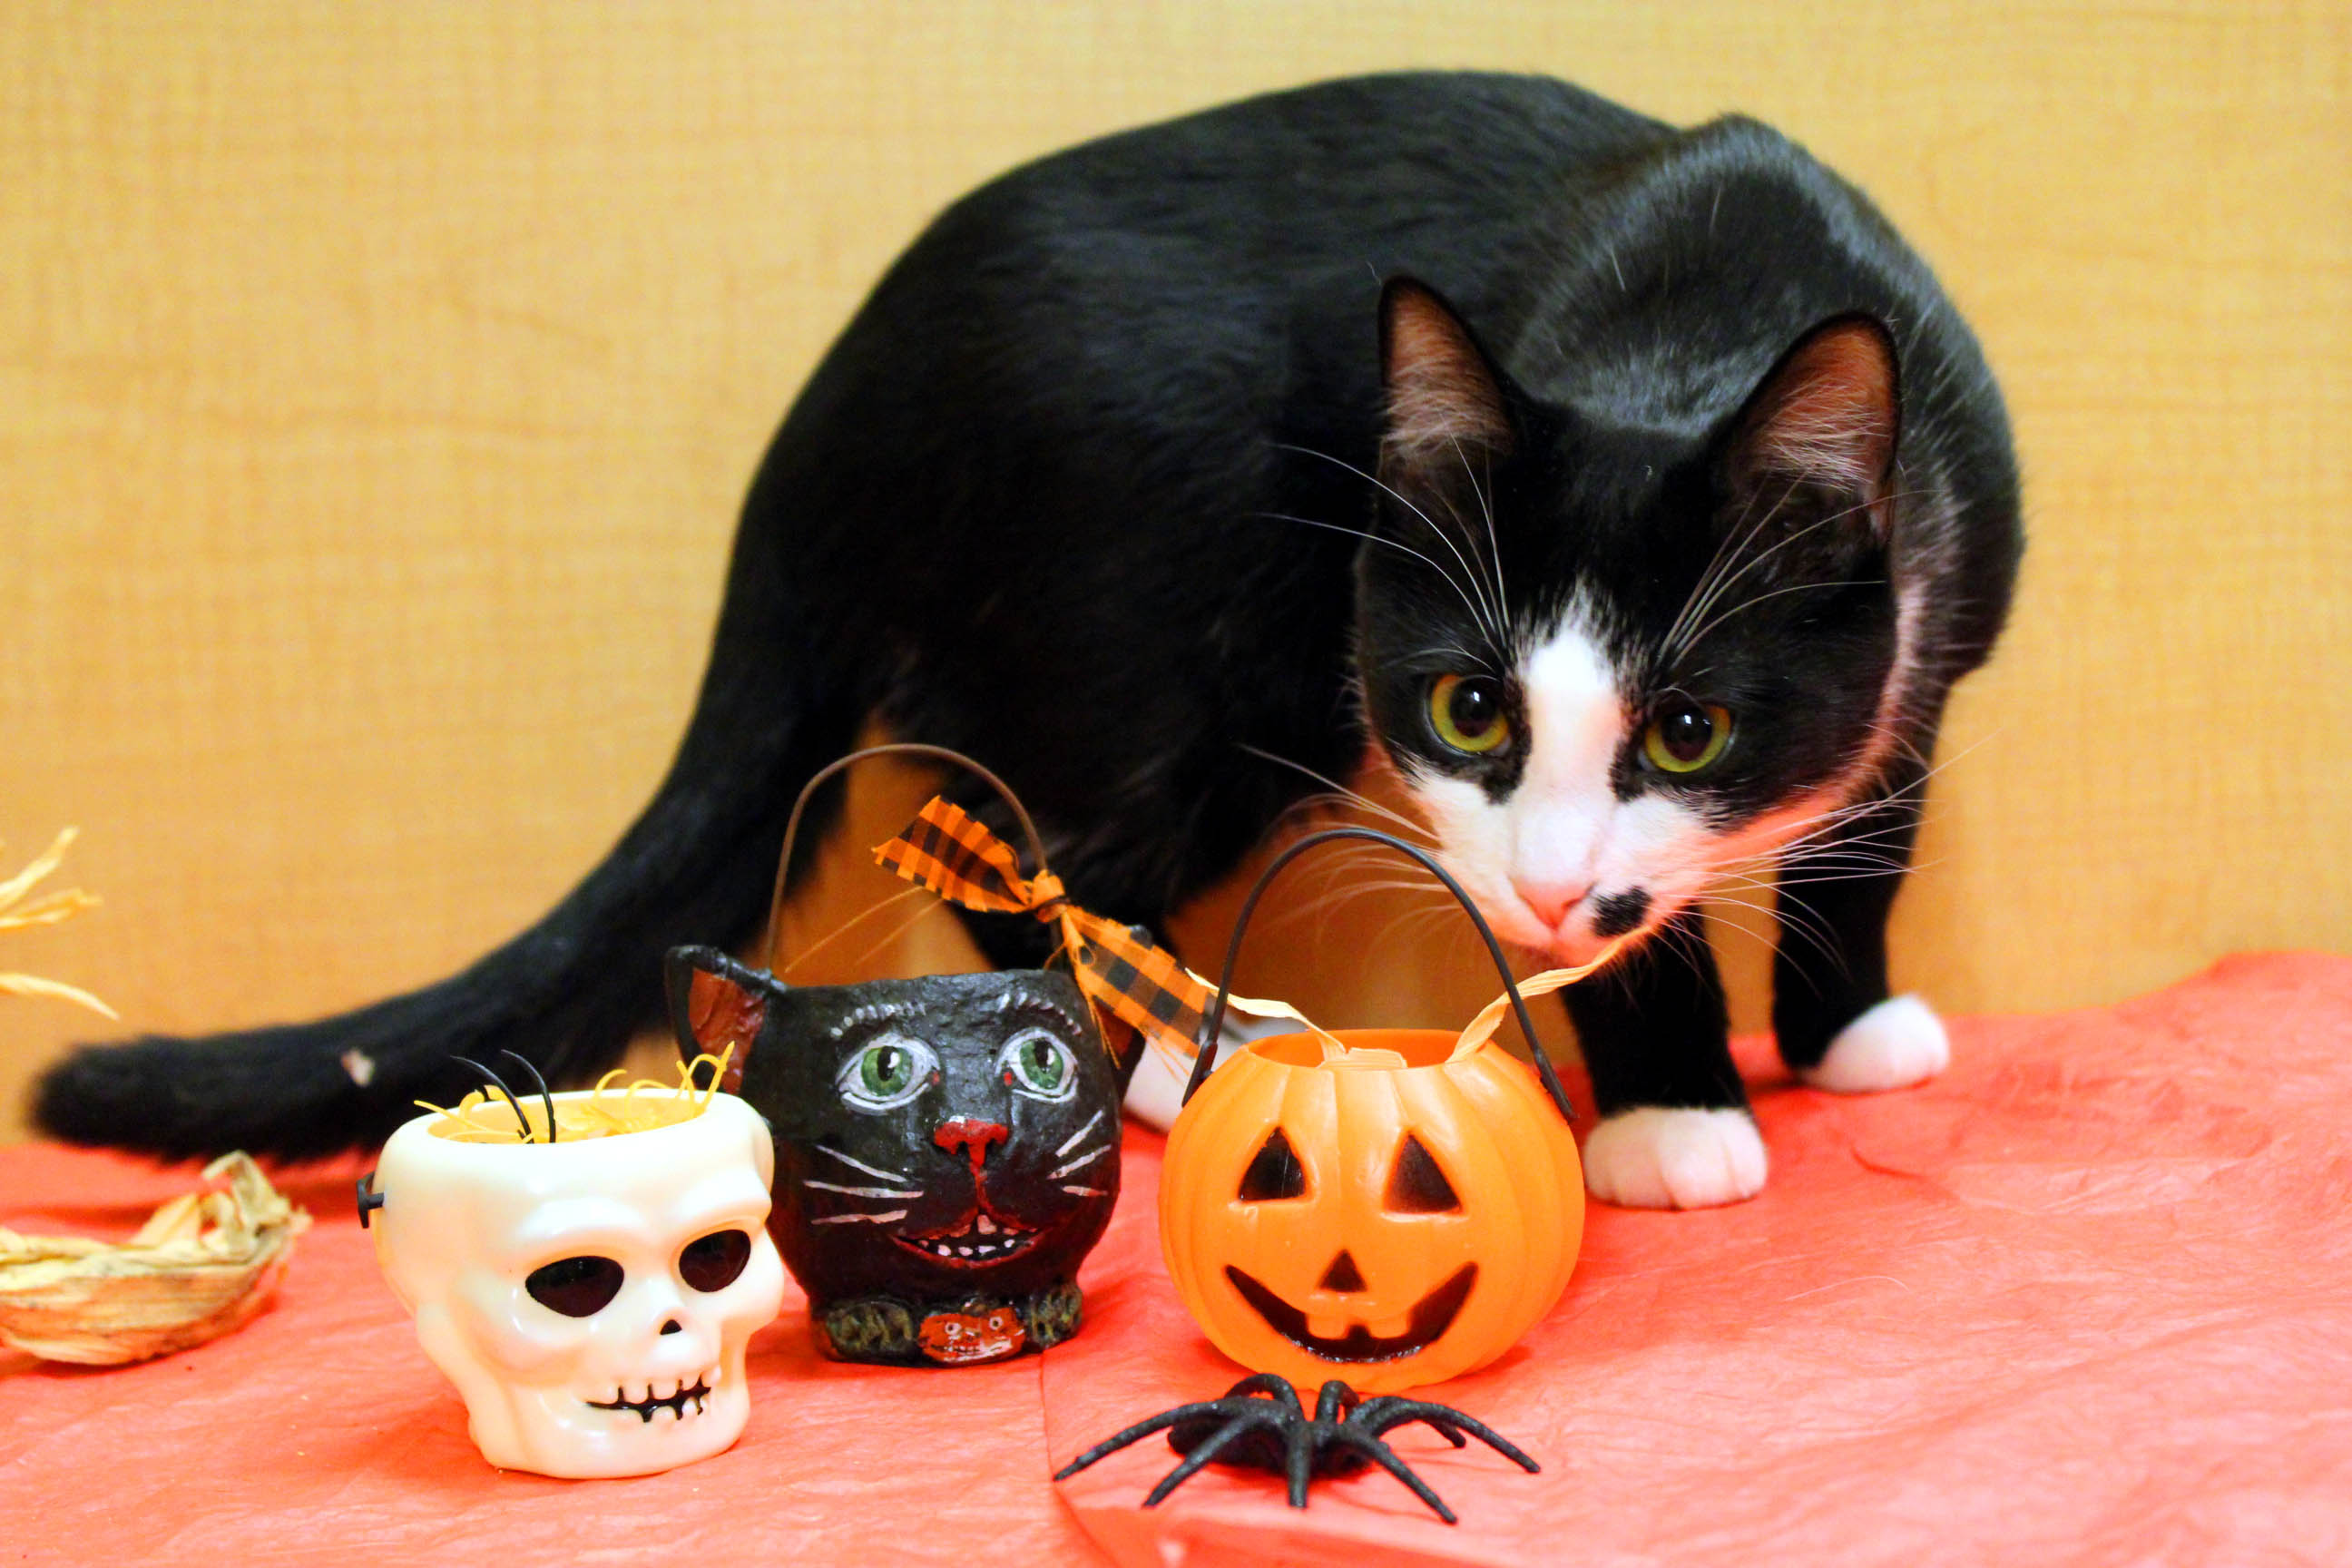 Halloween is a dangerous time for cats - Cat Tales